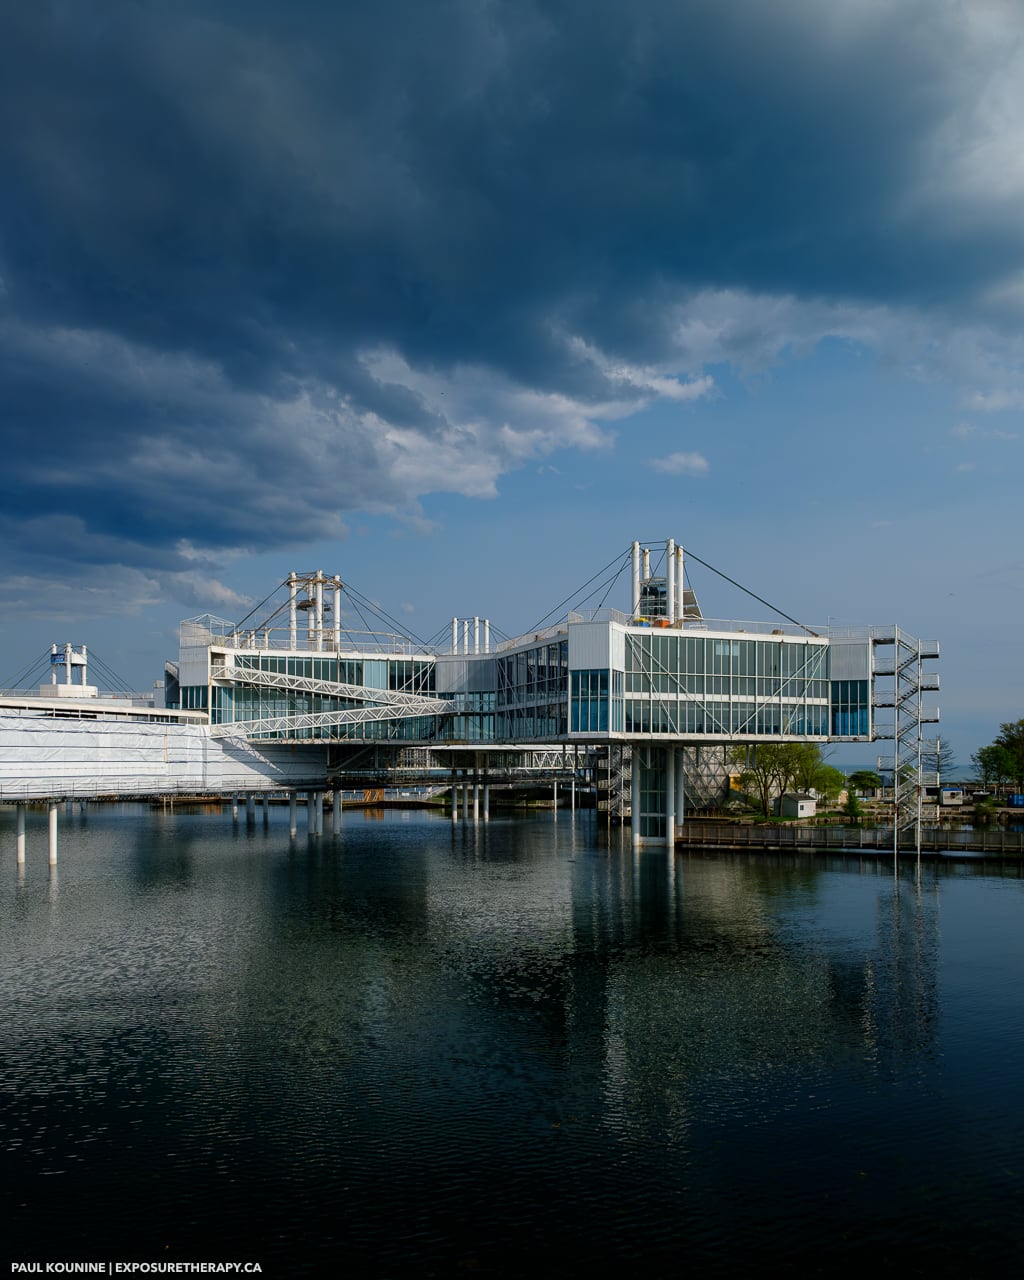 Clouds over ontario place event centre with water reflections and construction.